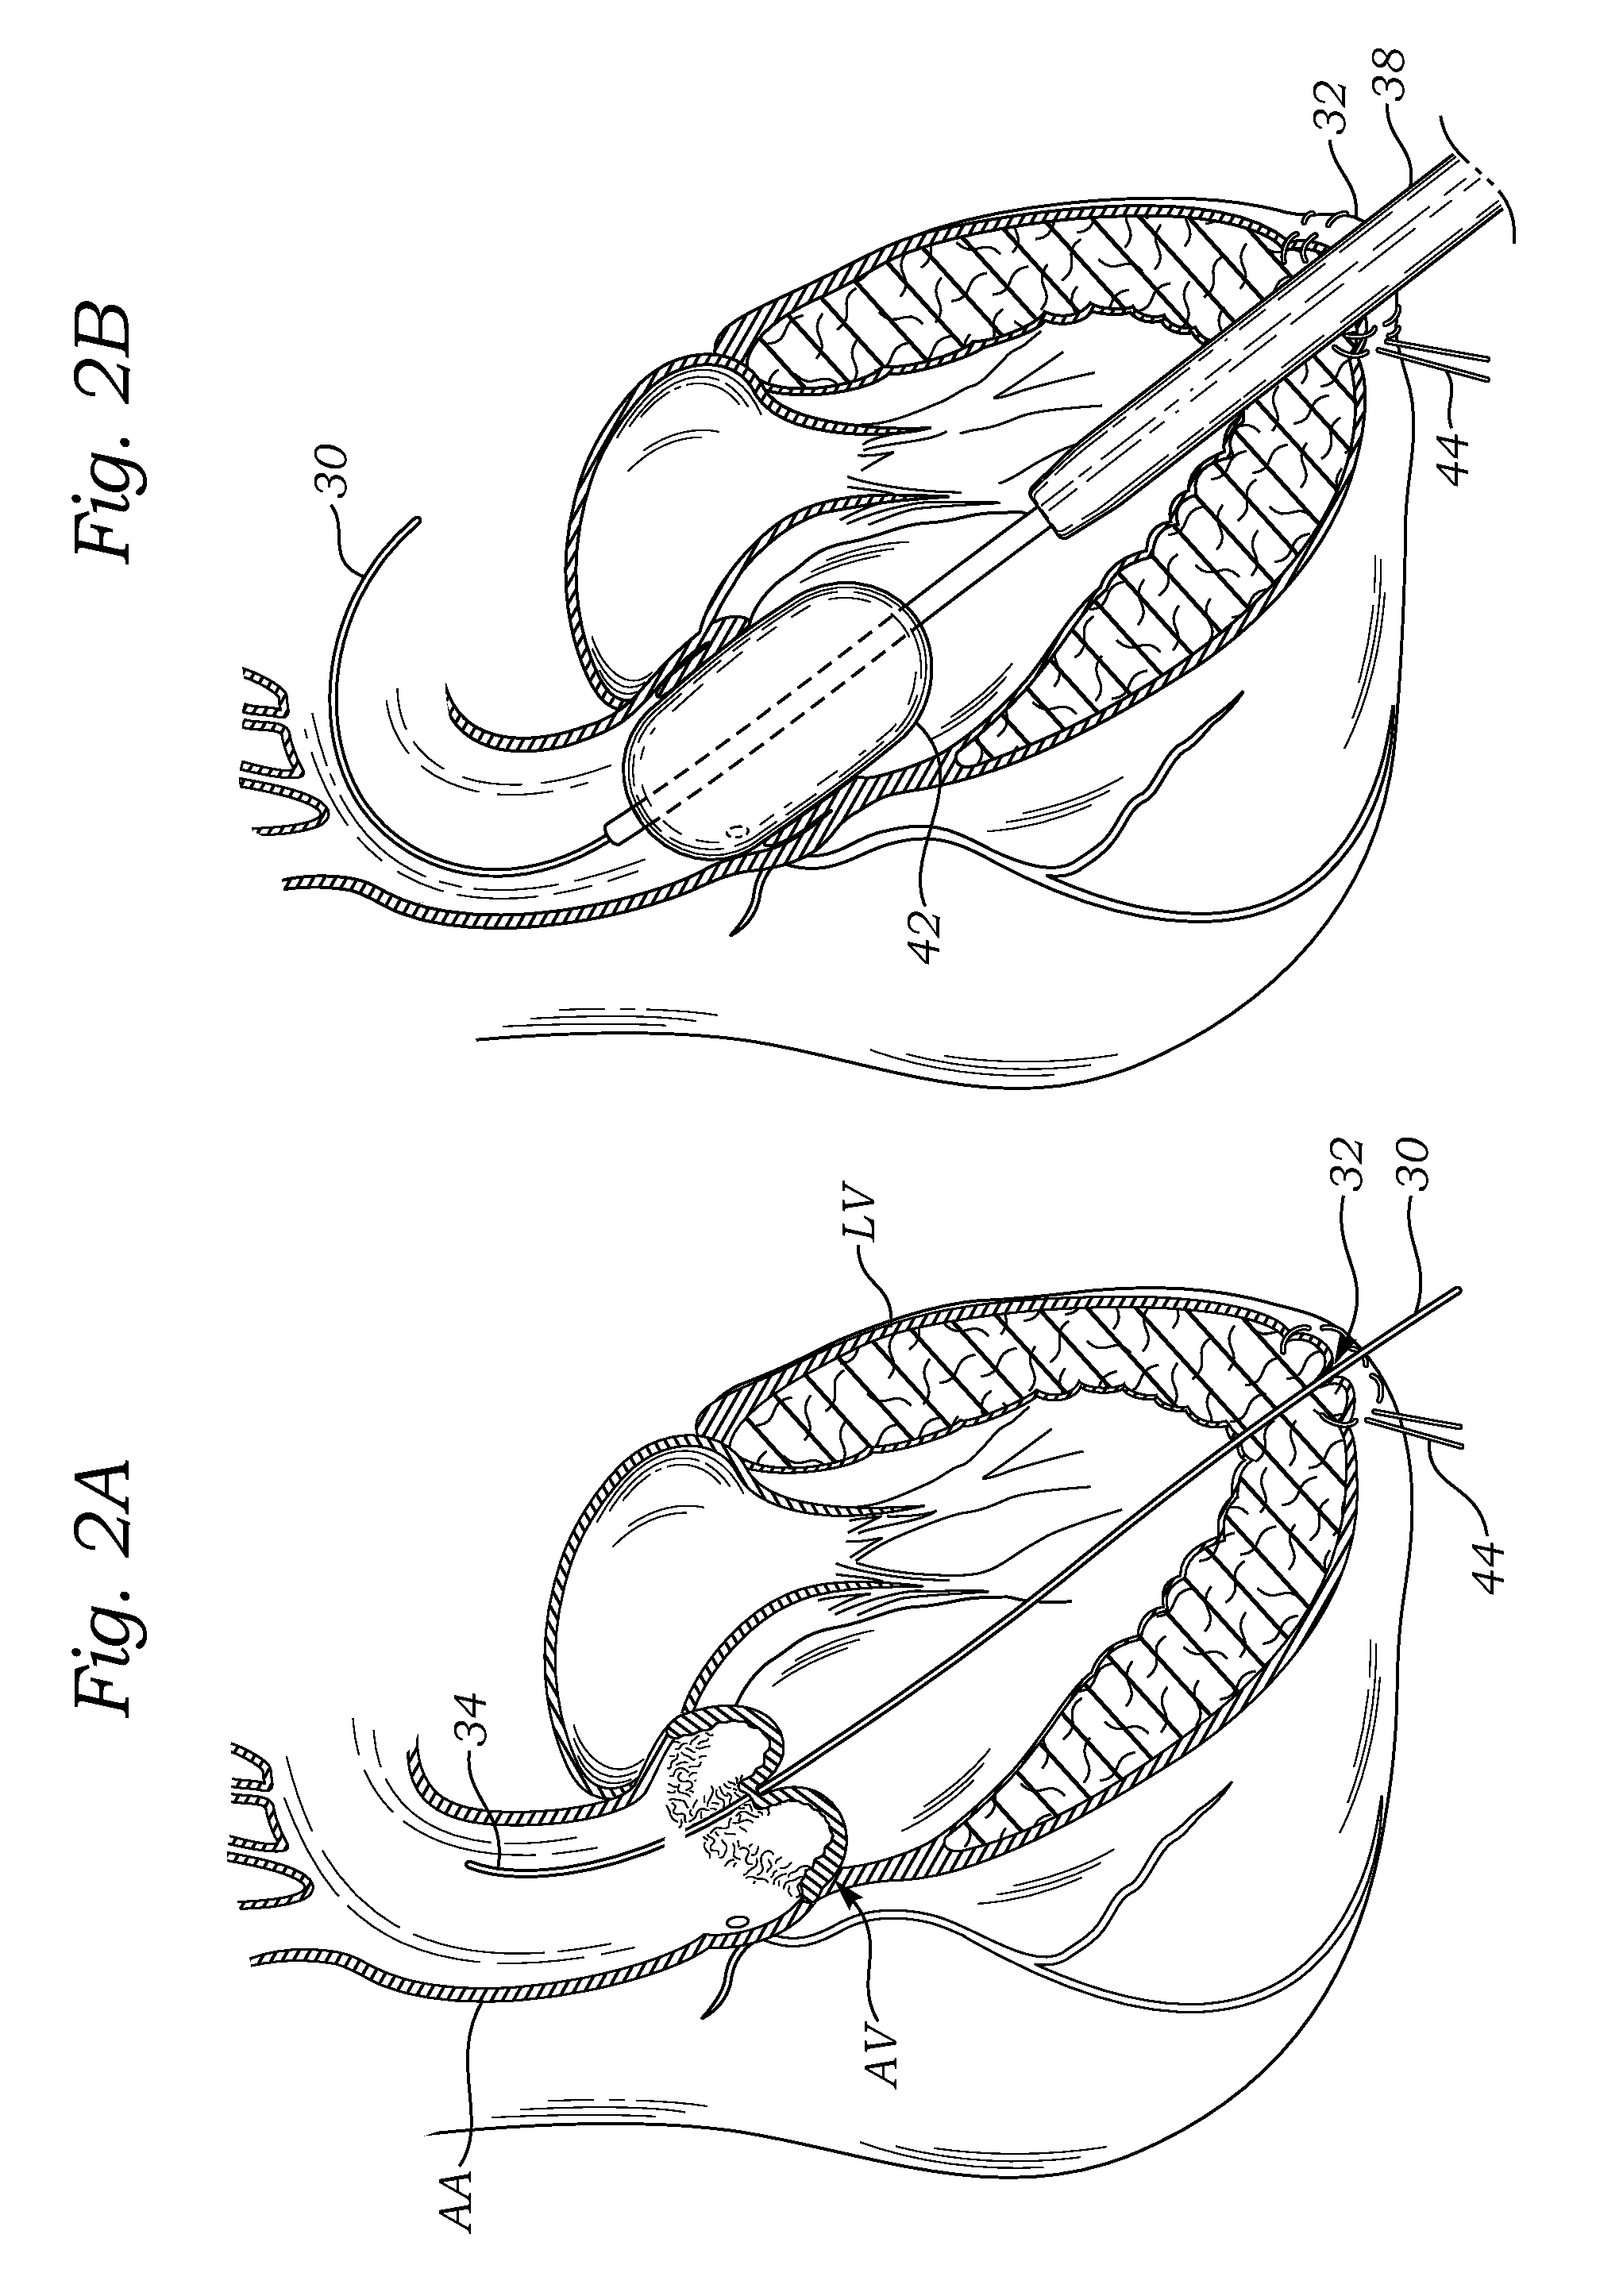 Transapical delivery system for heart valves